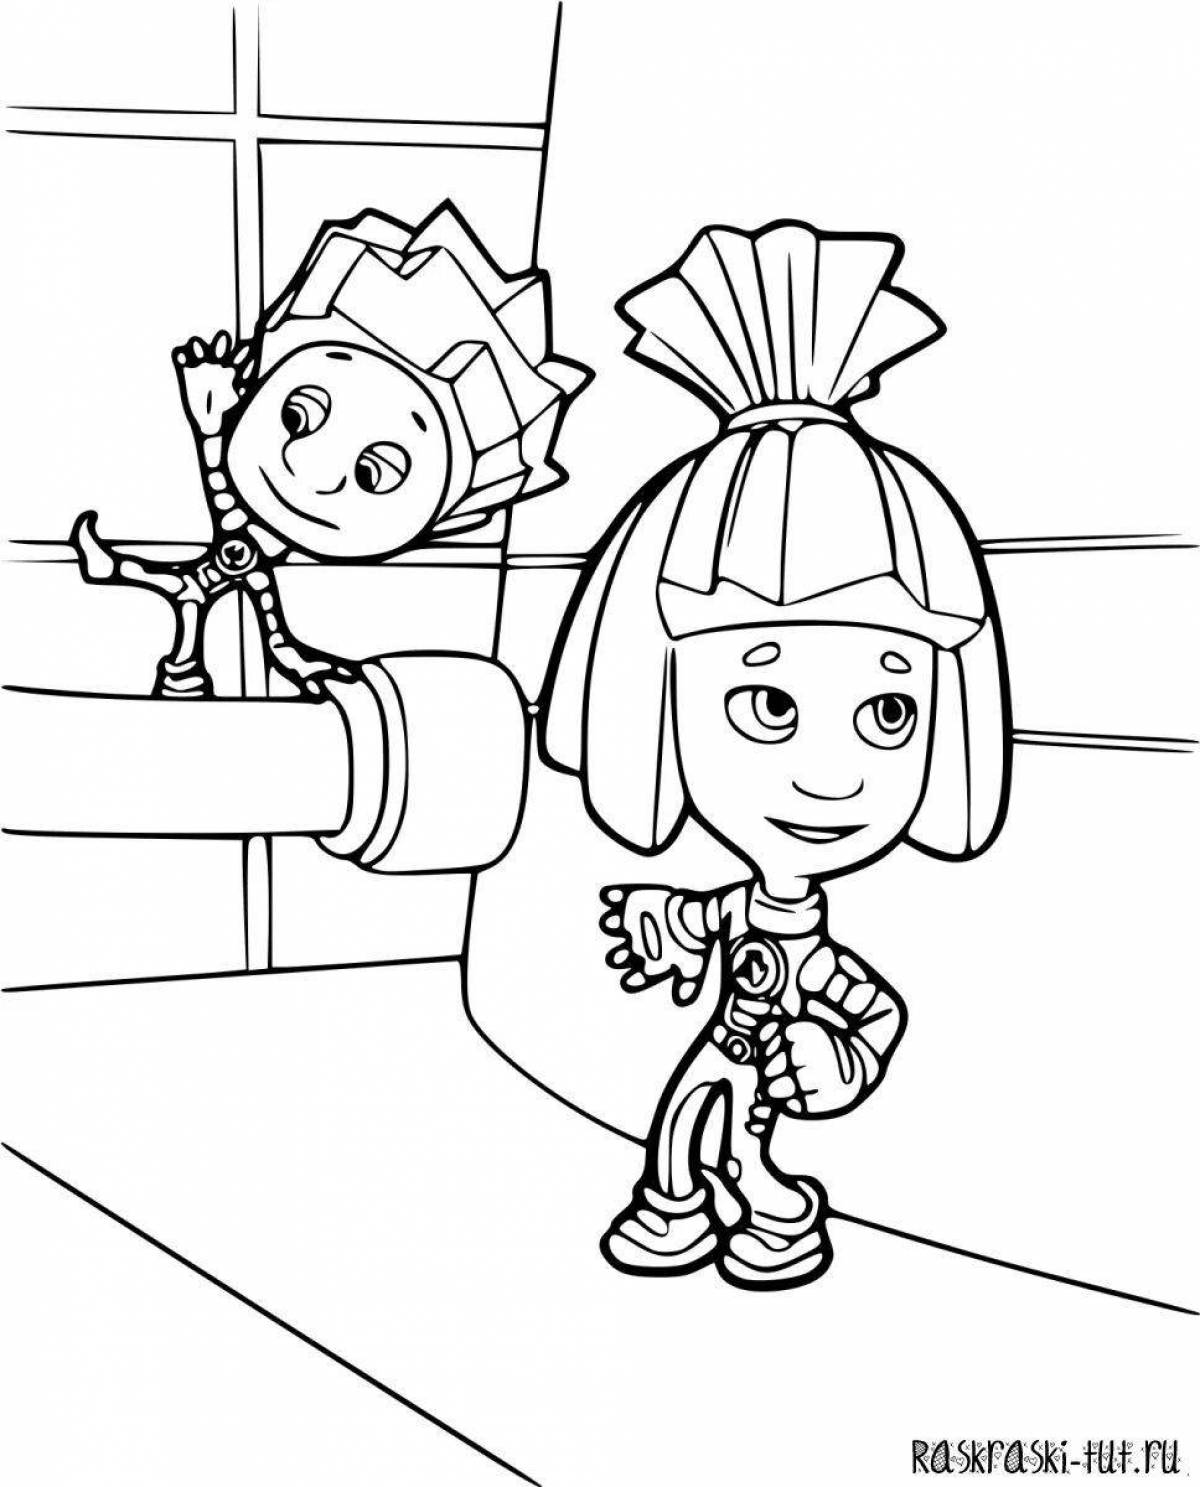 Coloring page adorable fixies